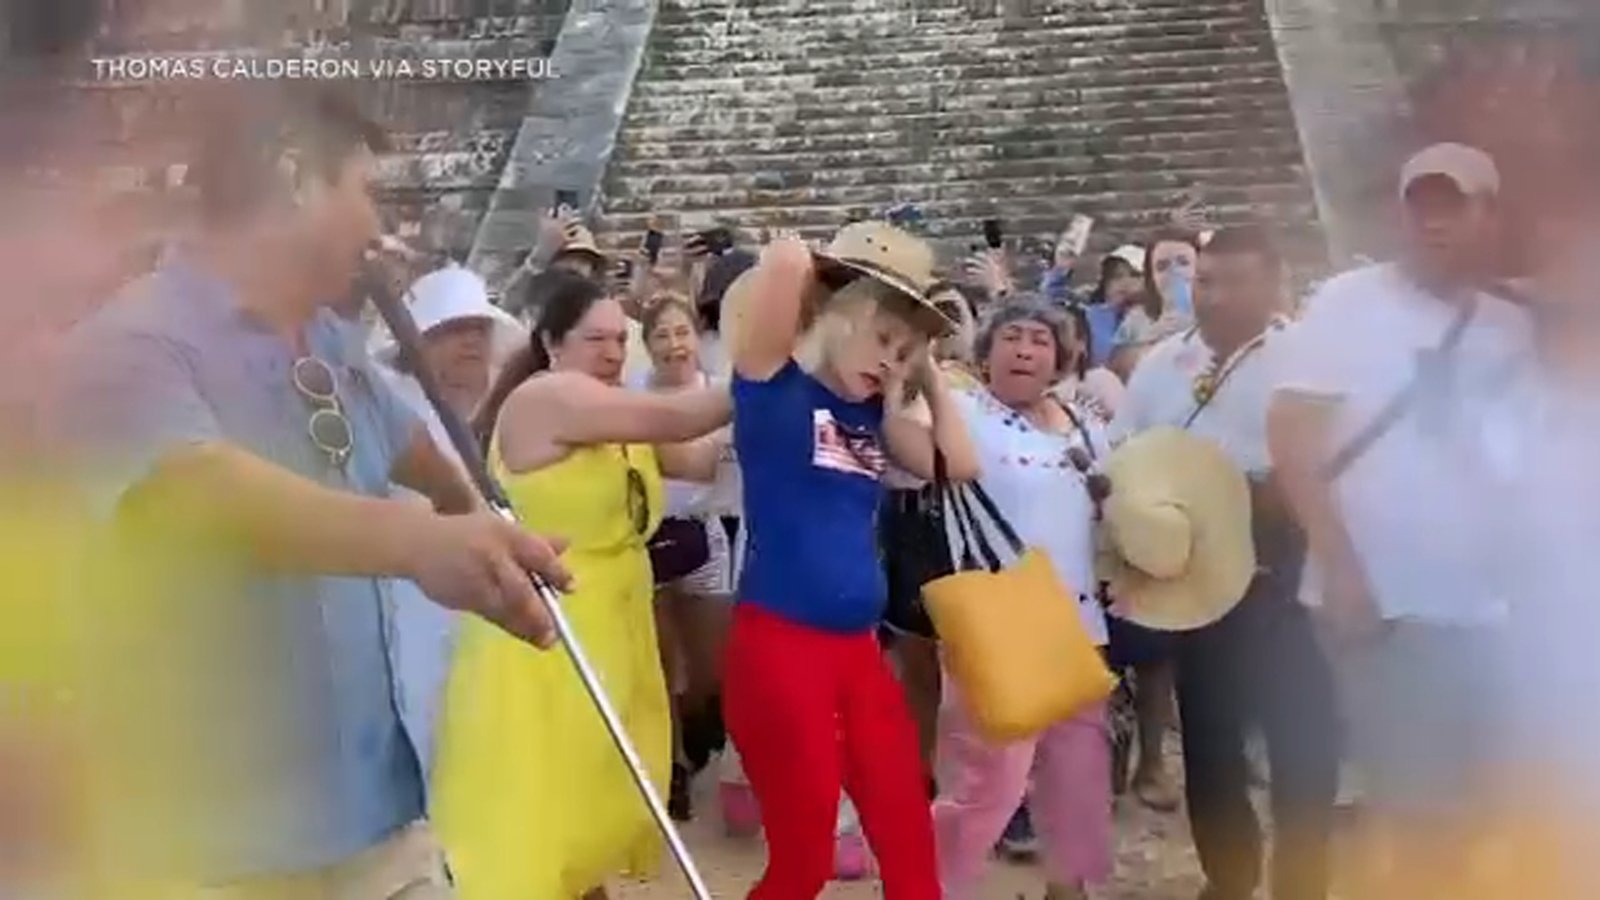 Tourist booed, detained after climbing stairs at protected Mayan monument El Castillo in Mexico - ABC7 Los Angeles